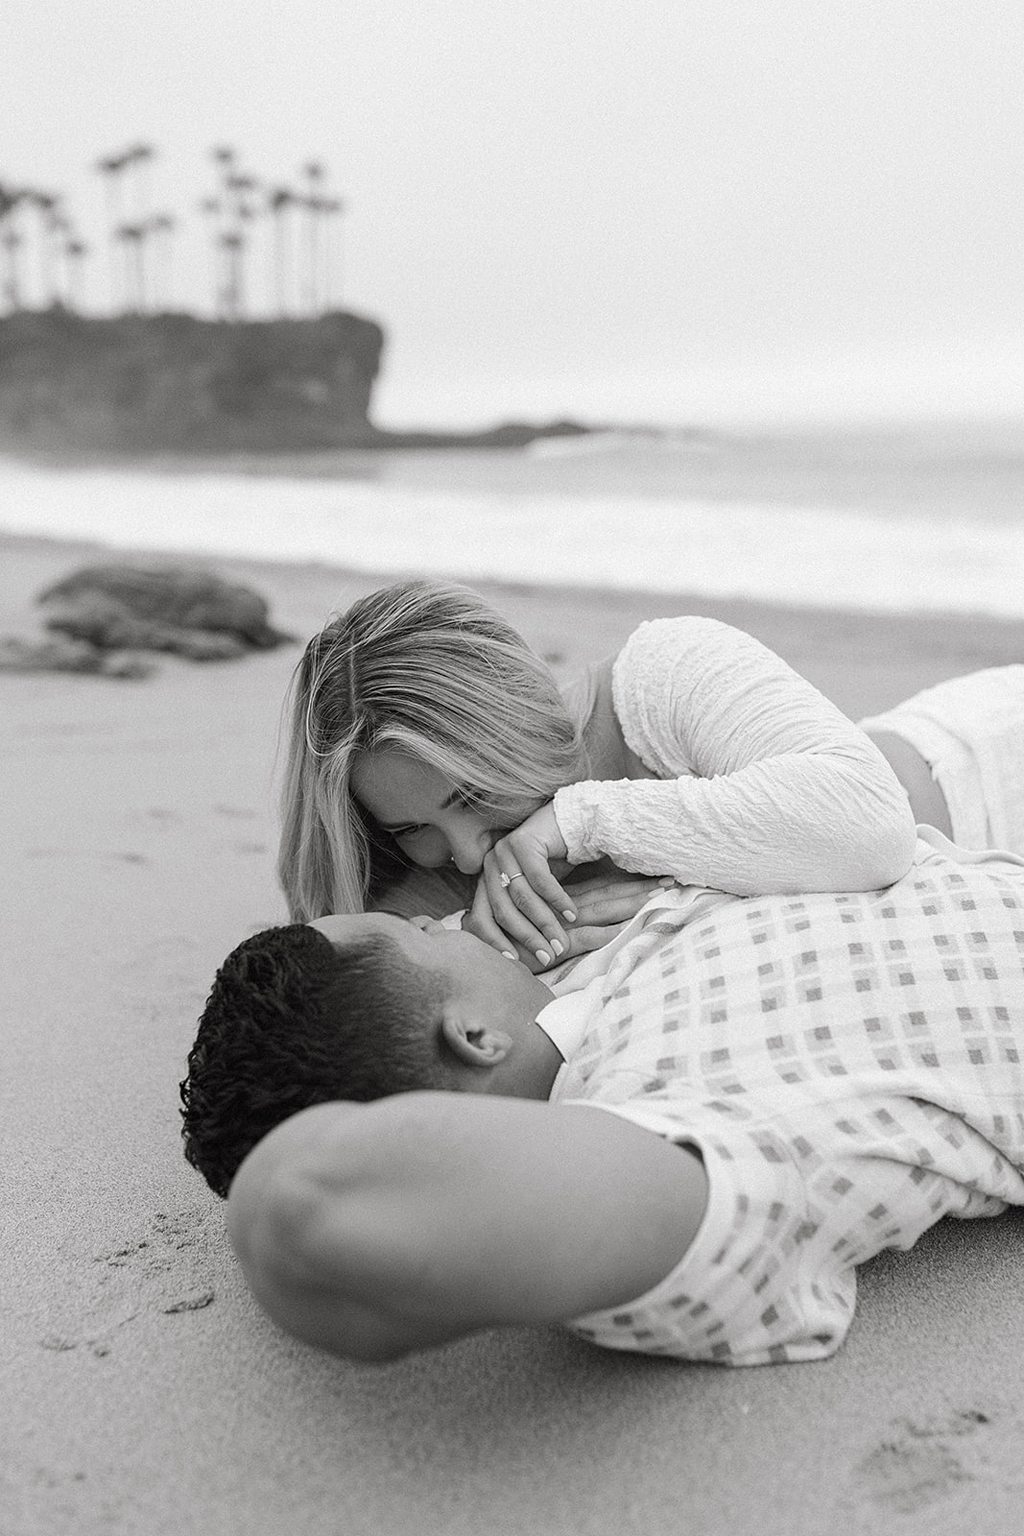 Couples beach engagement photos photographed by NICOLE KIRSHNER